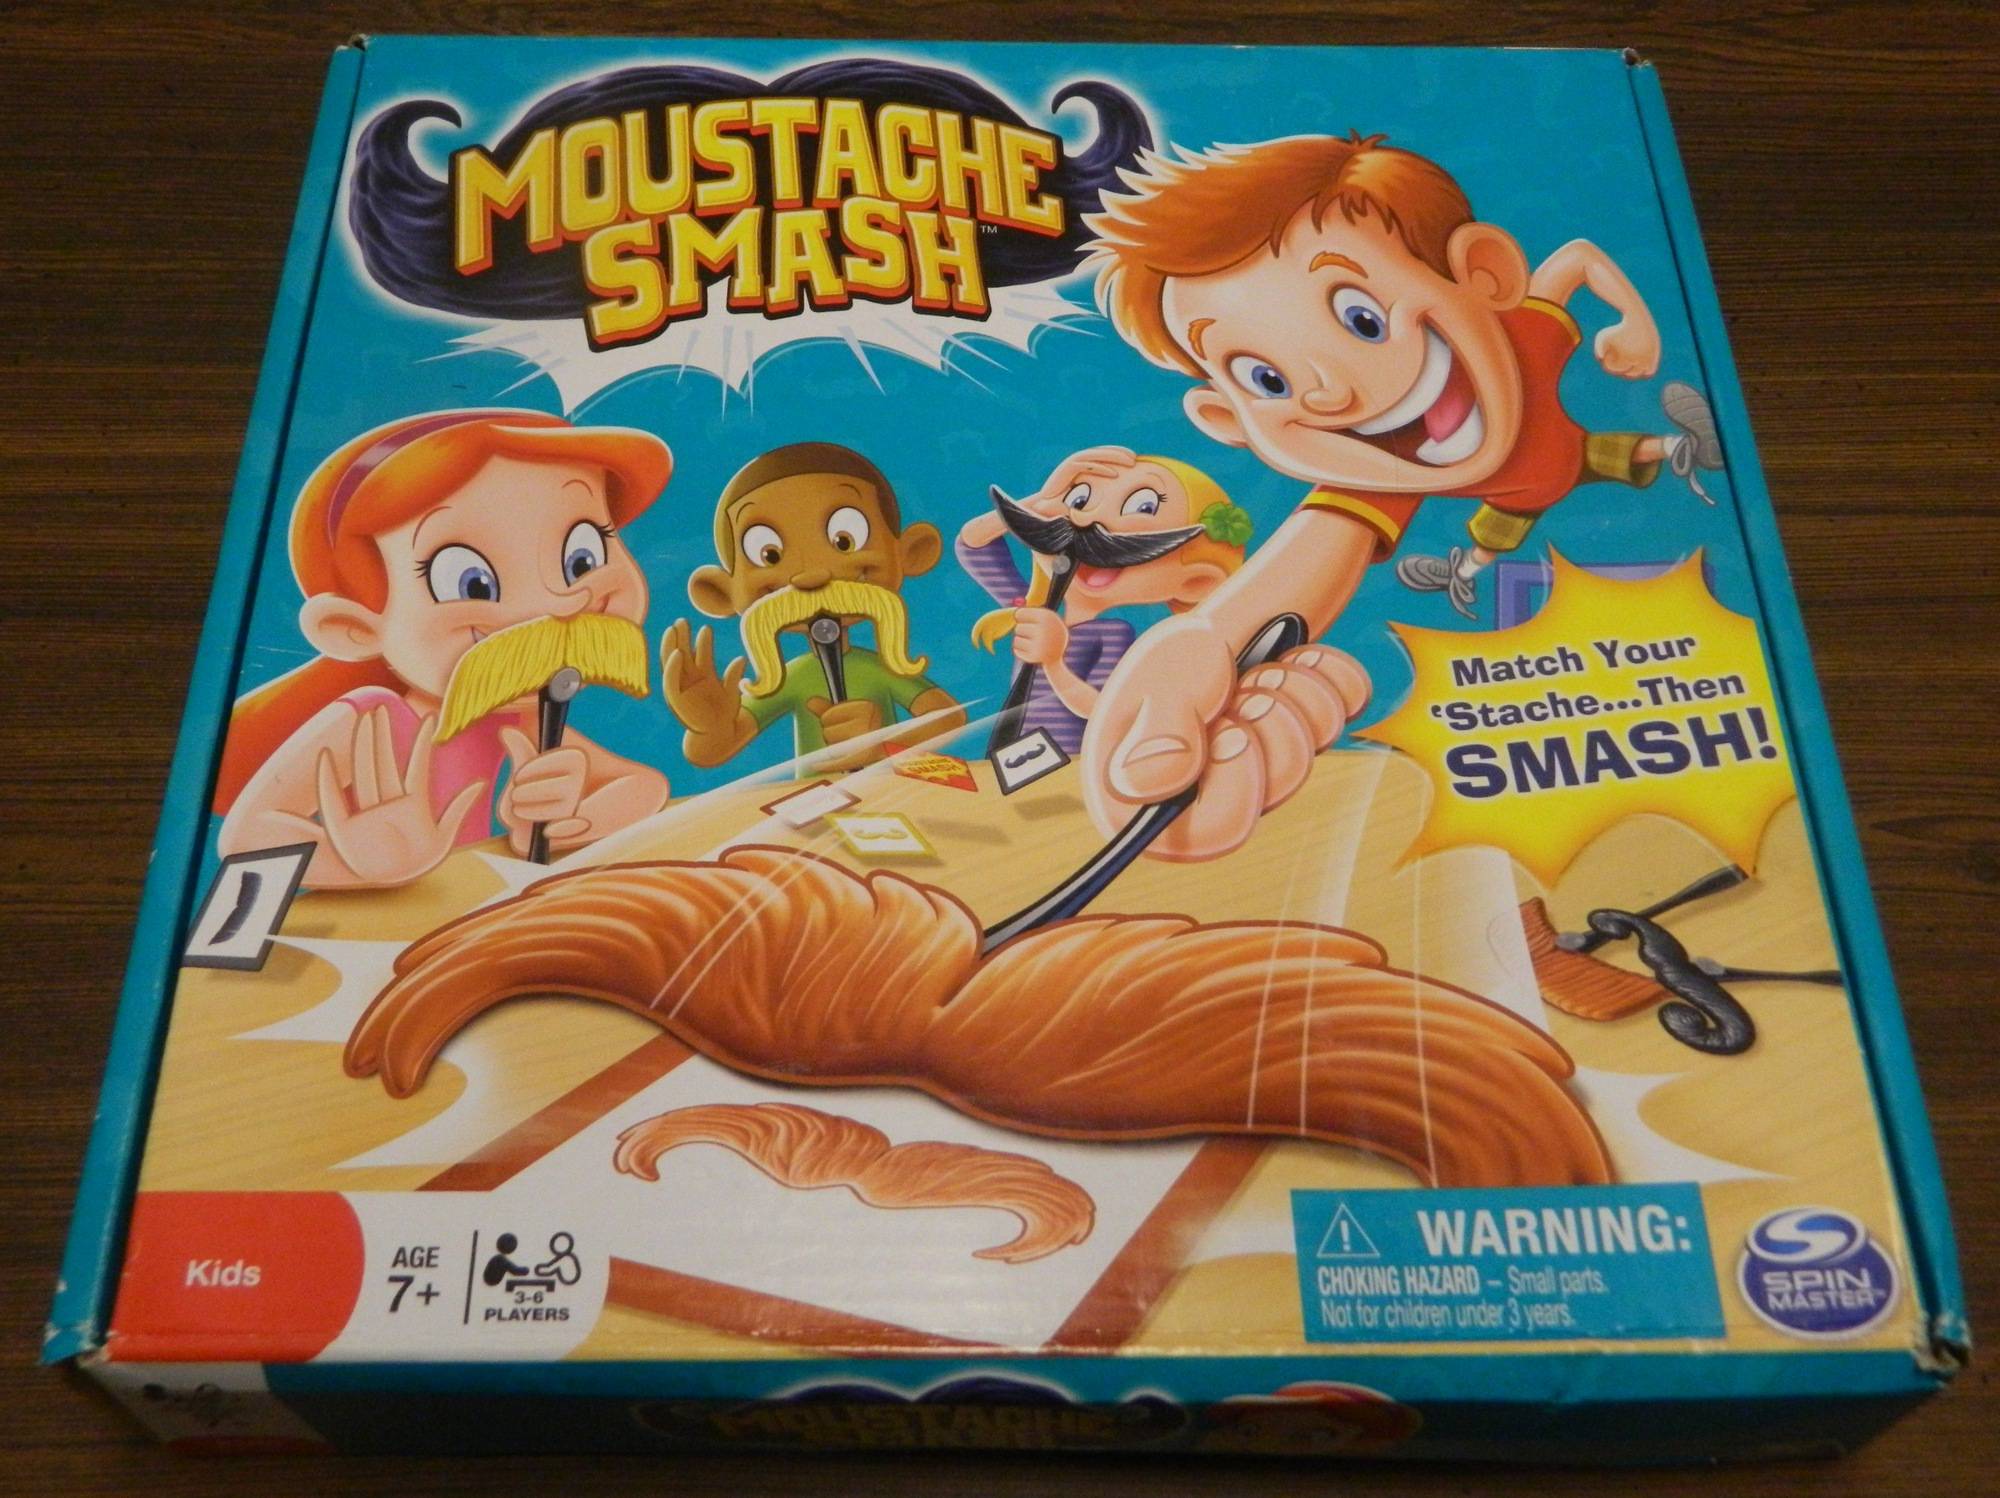 Moustache Smash Board Game Review and Rules